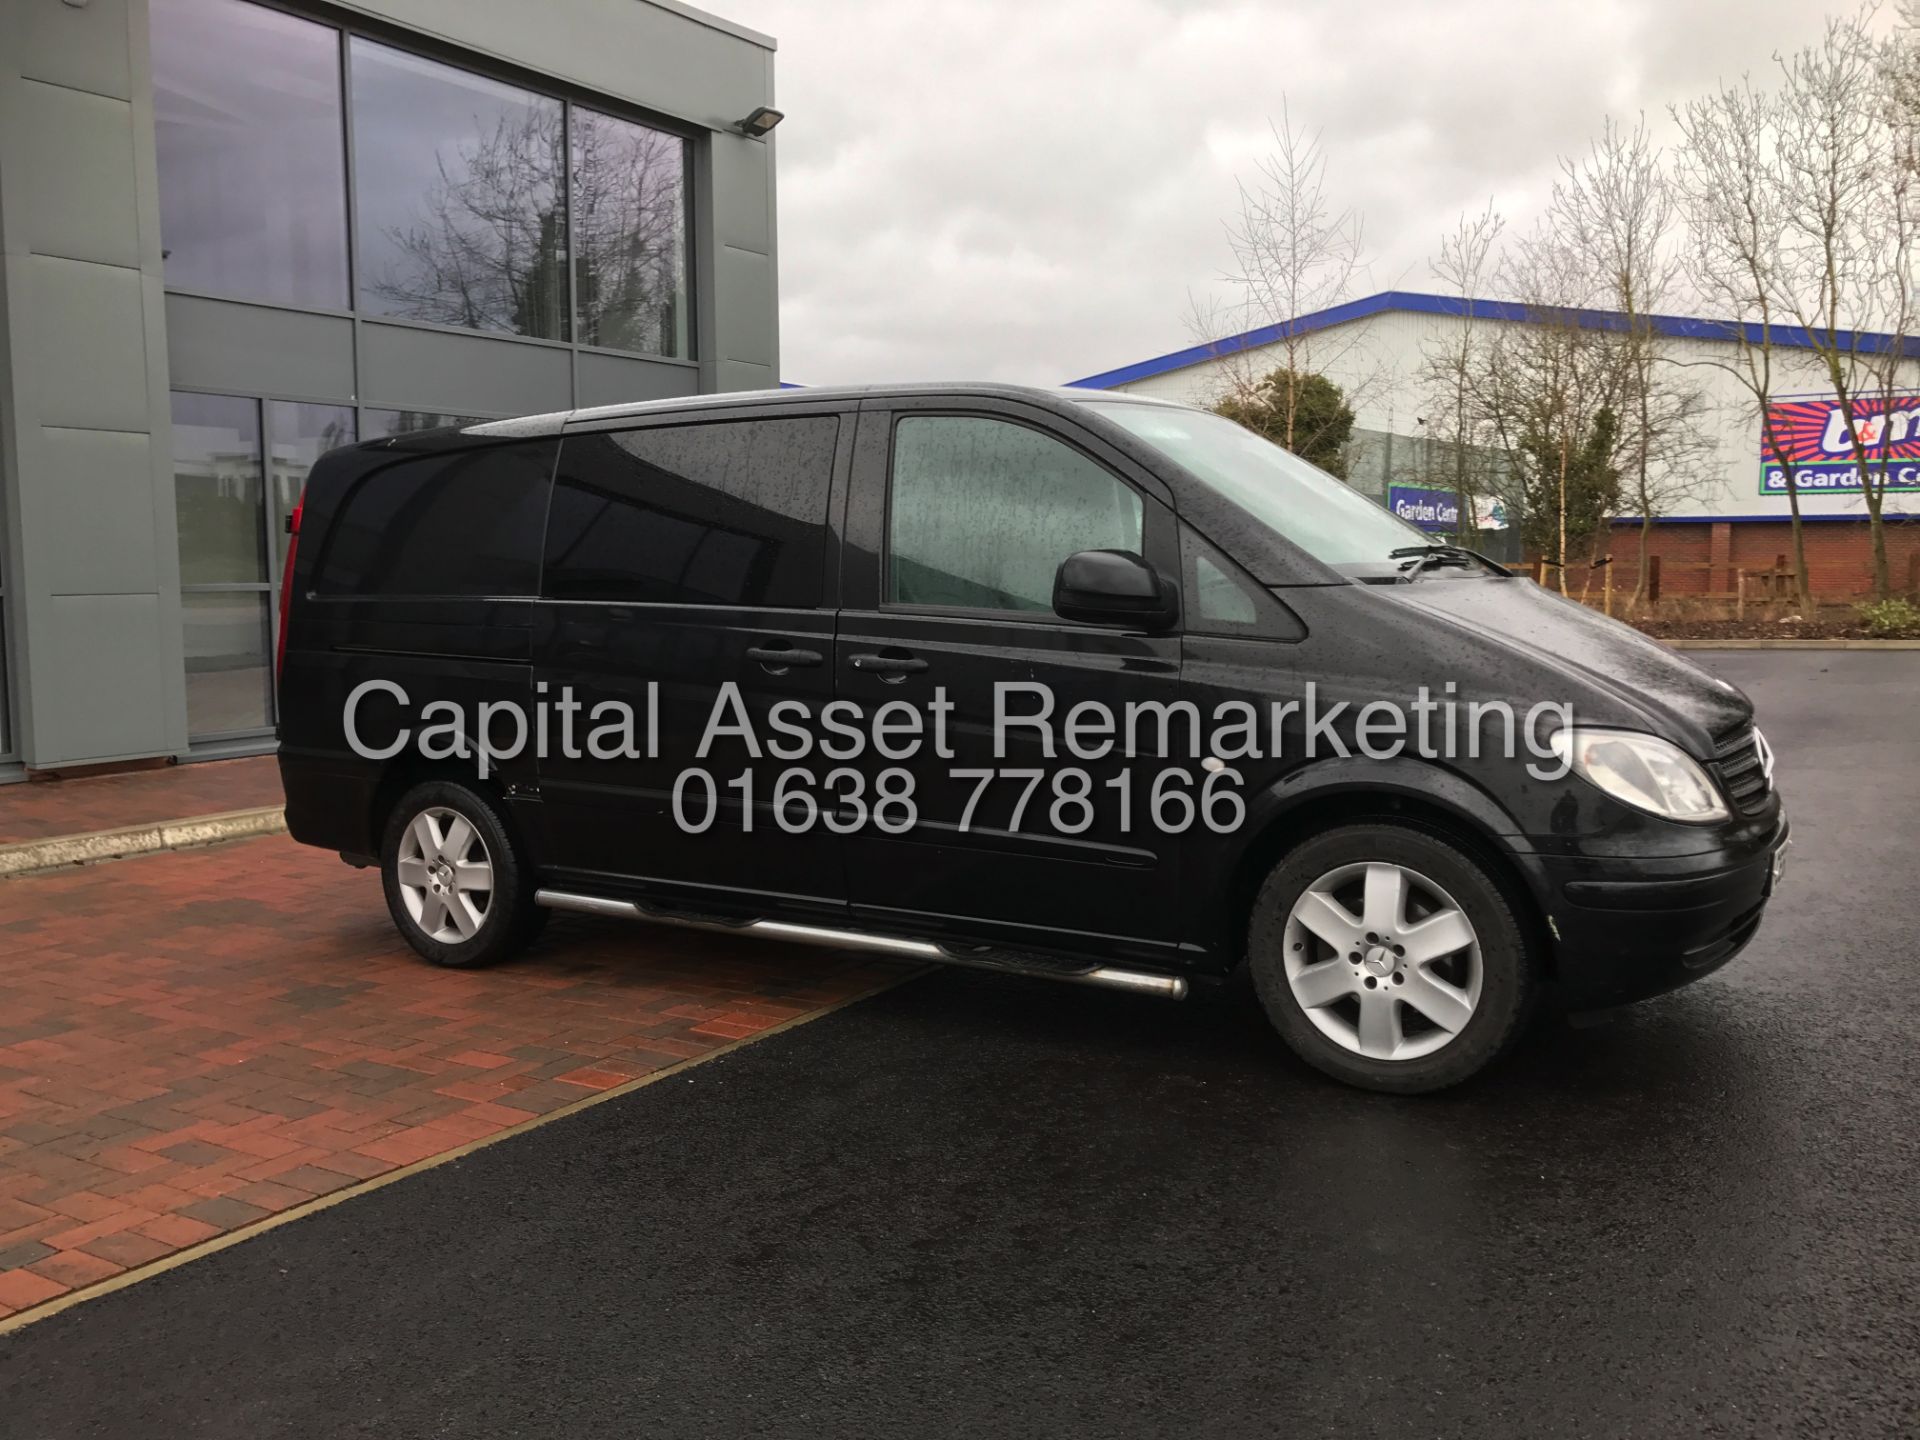 (ON SALE) MERCEDES VITO "SPORTY - 115BHP" LWB (2011 MODEL) 5 SEATER DUELINER -1 OWNER-AIR CON-ALLOYS